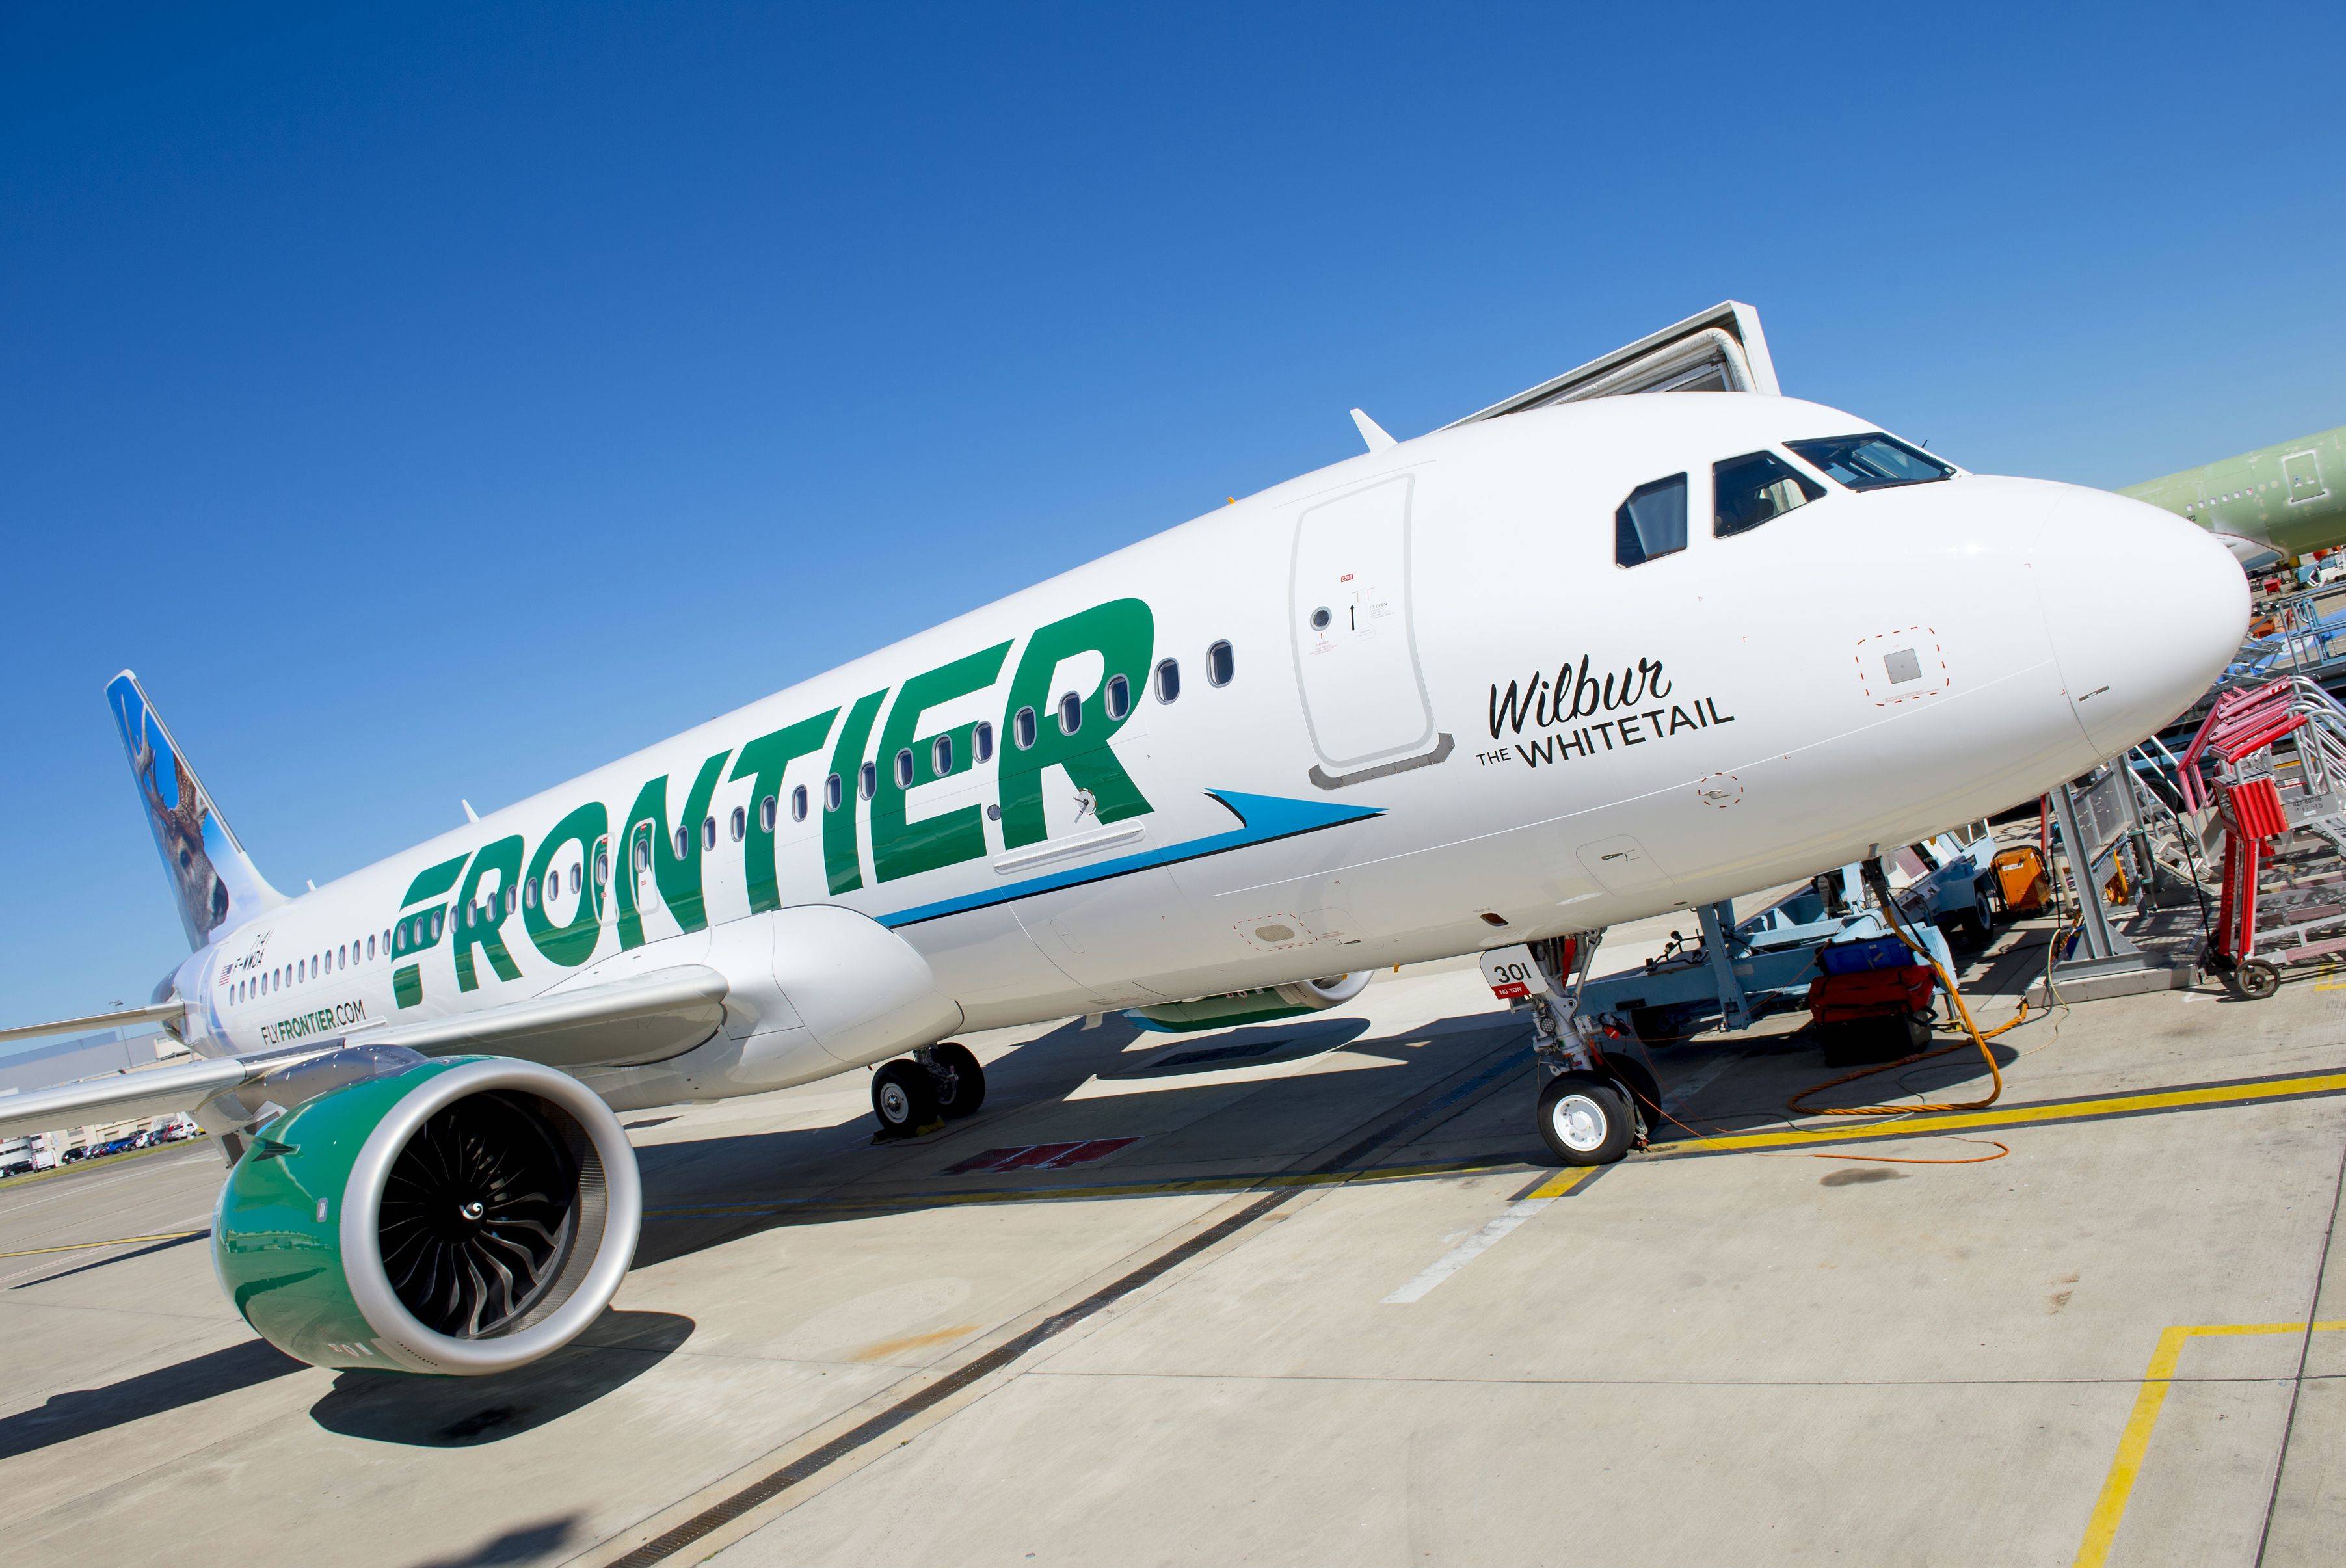 Frontier Airlines Cancellation Policy: You need to know